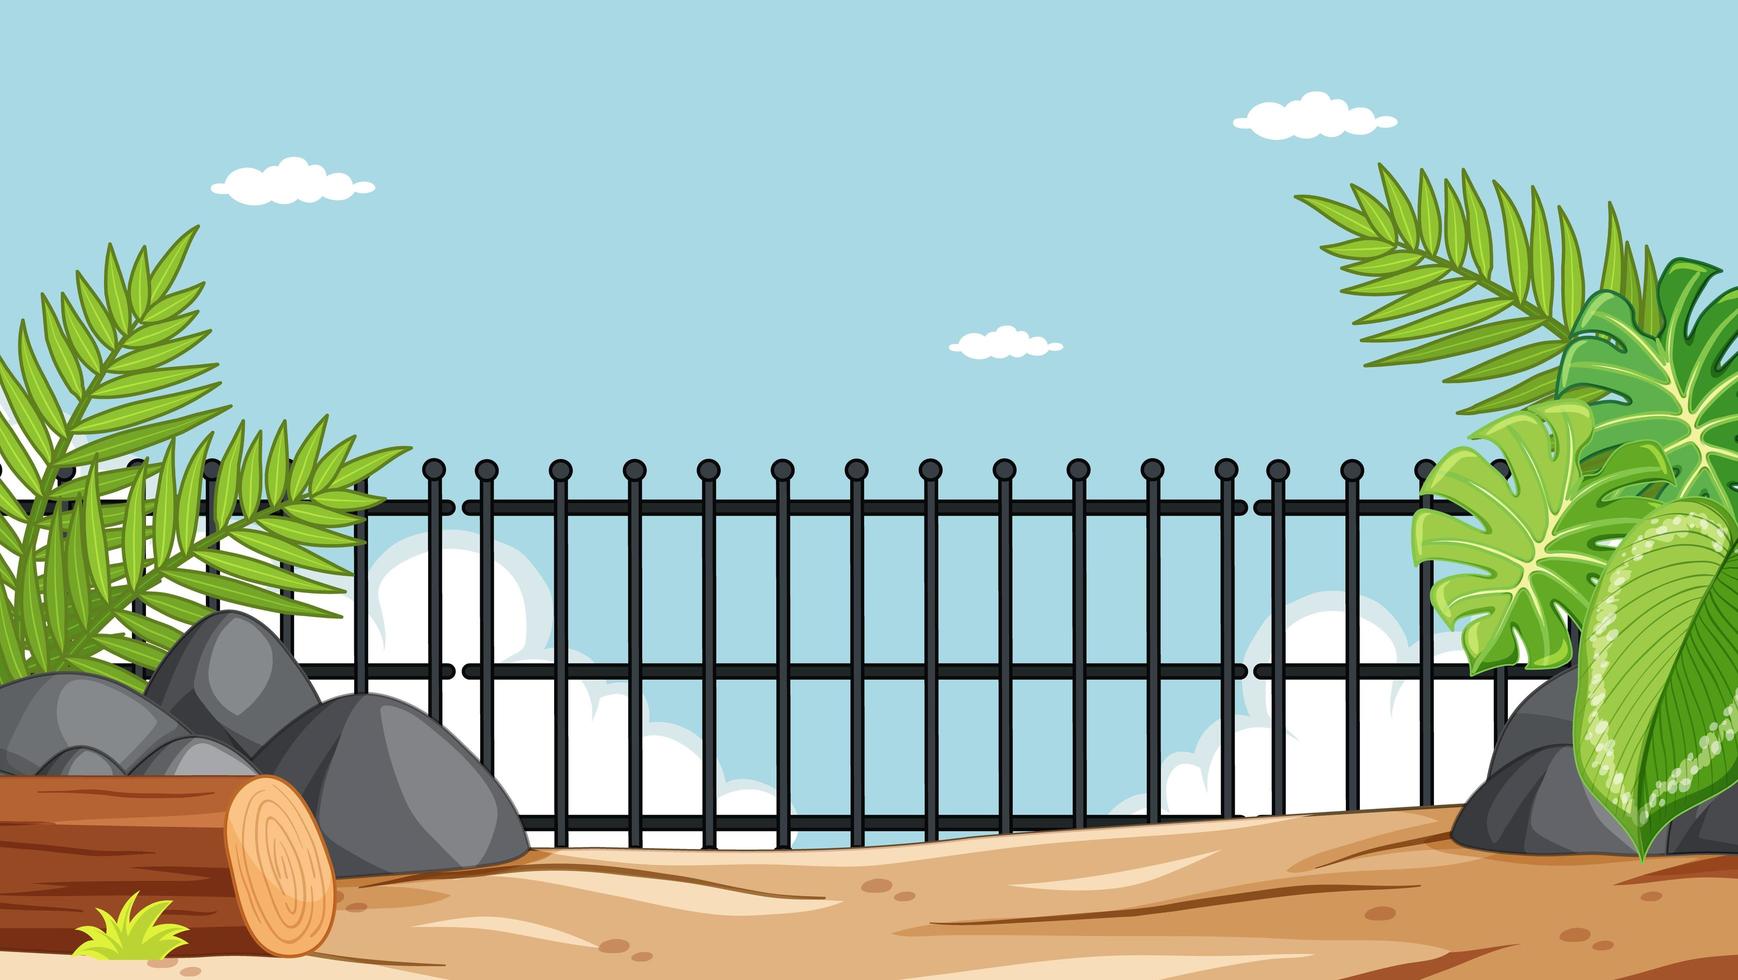 Zoo park without animals scene vector